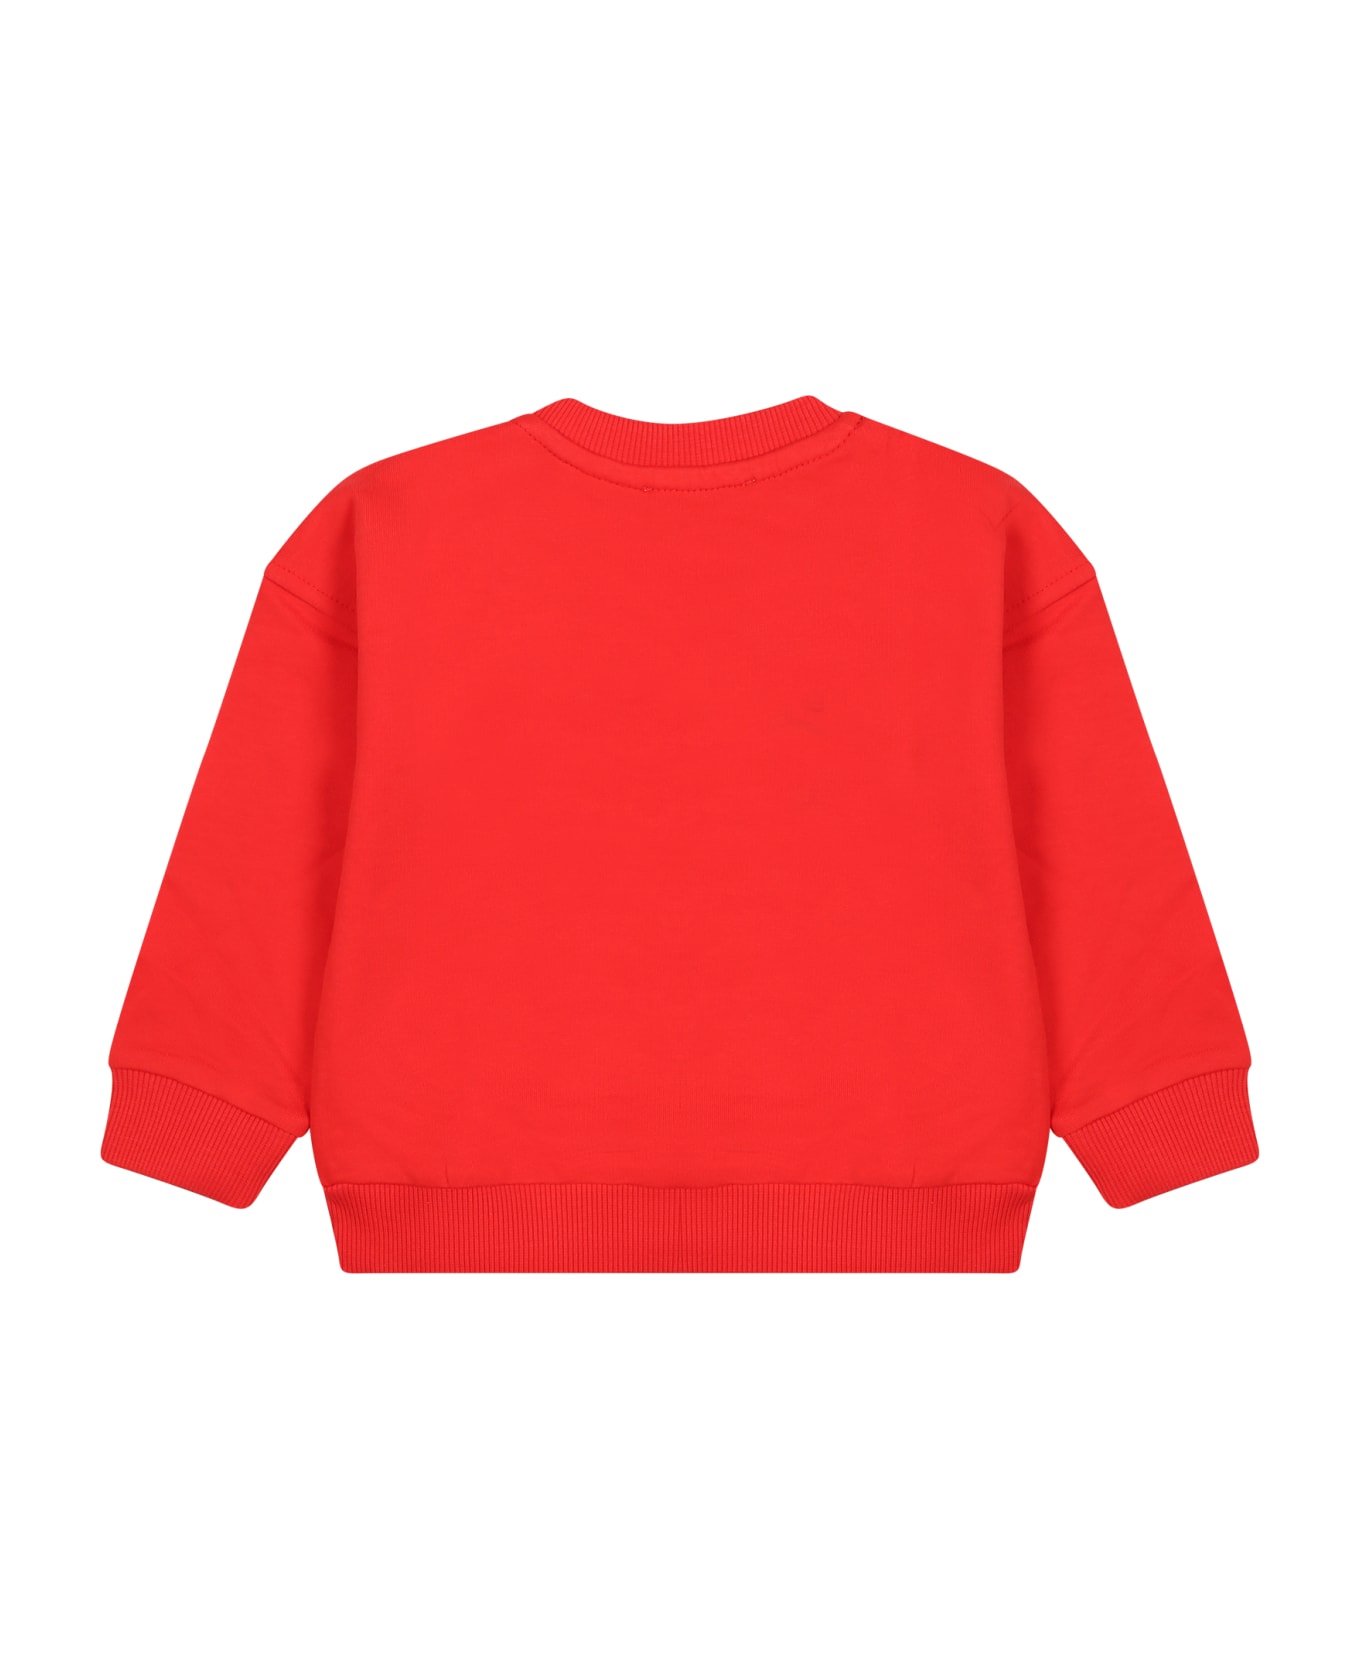 Moschino Red Sweatshirt For Babies With Teddy Bear - Red